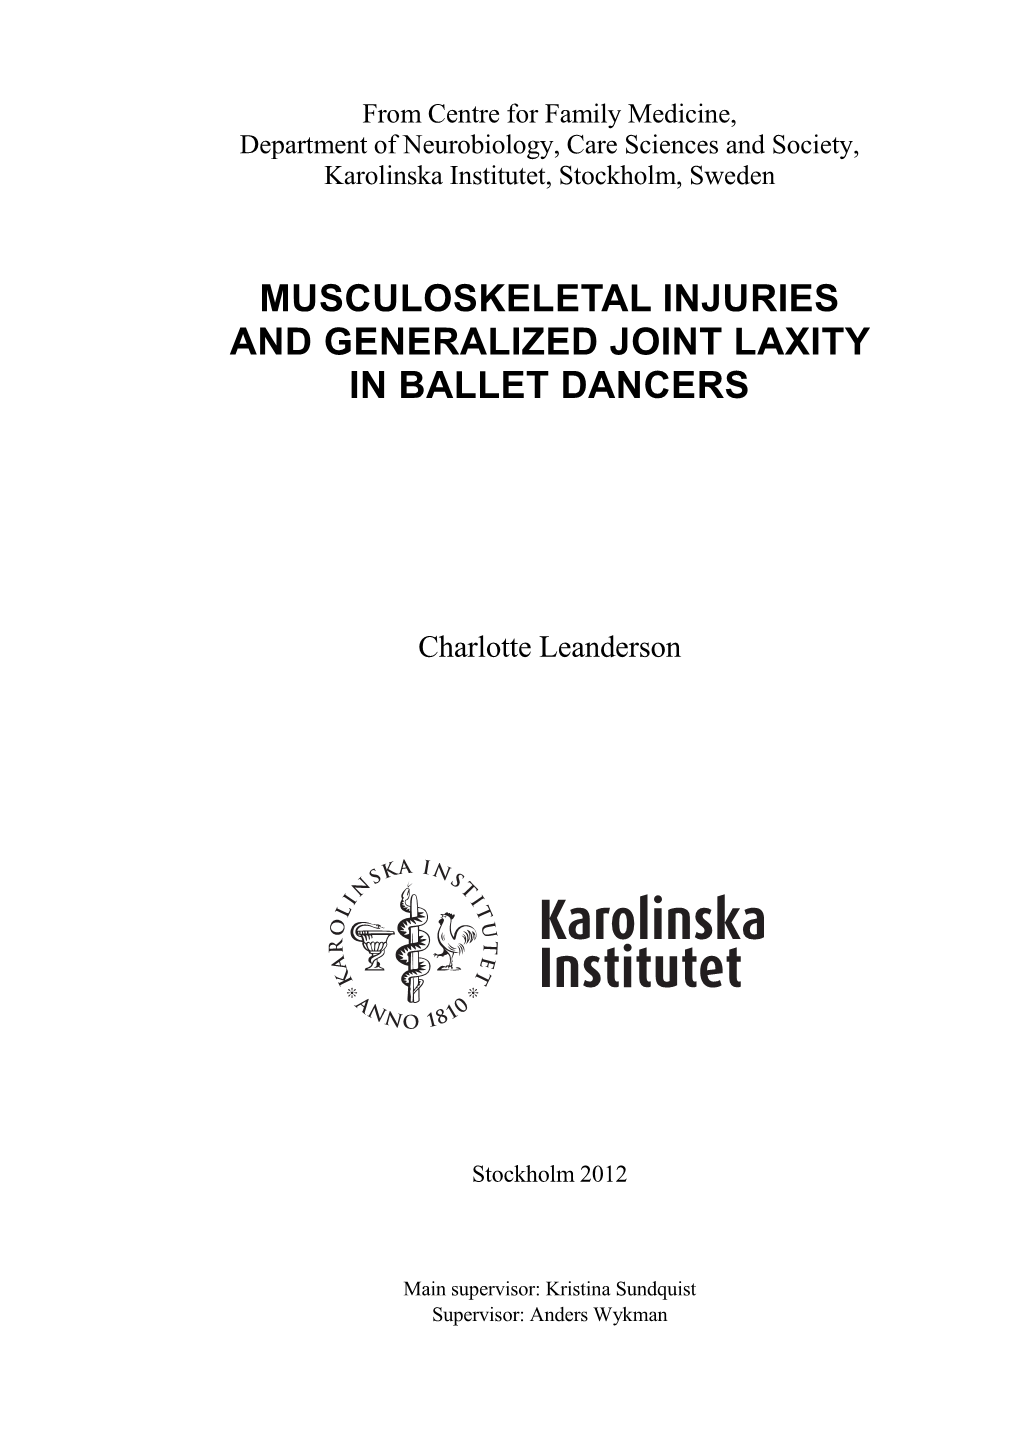 Musculoskeletal Injuries and Generalized Joint Laxity in Ballet Dancers